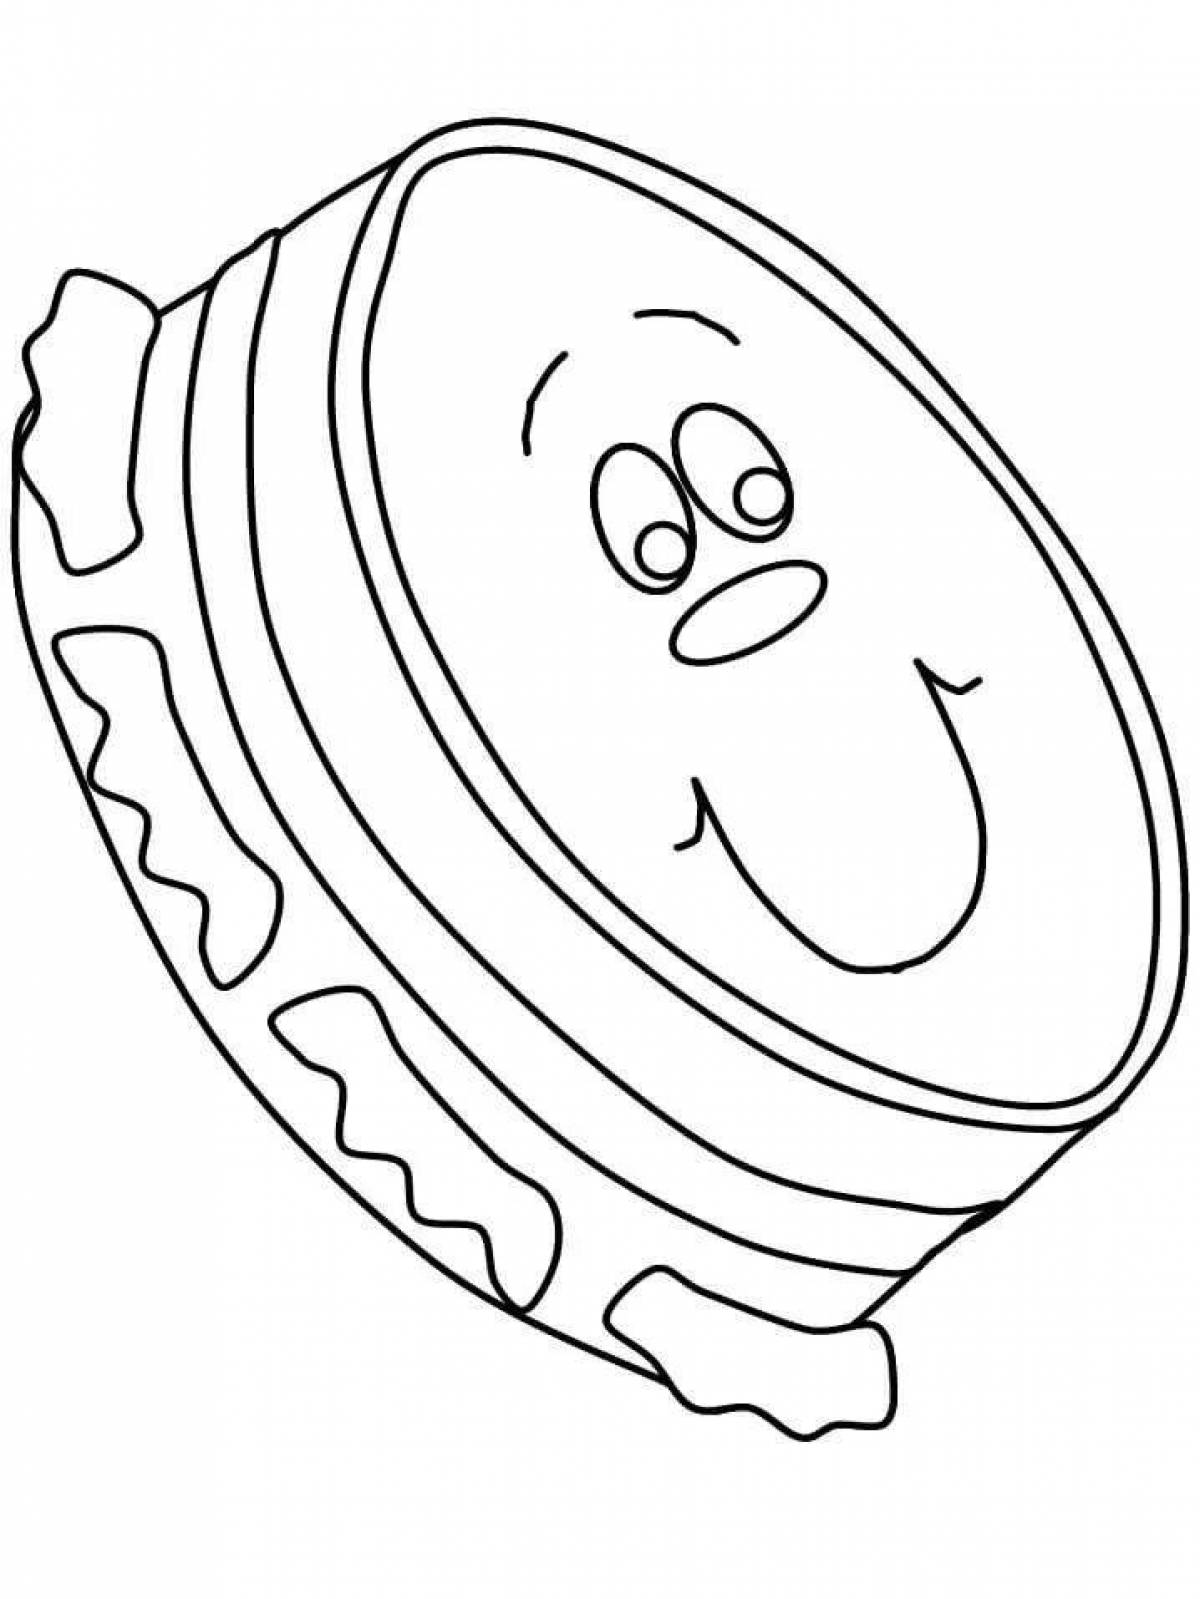 Gorgeous tambourine coloring page